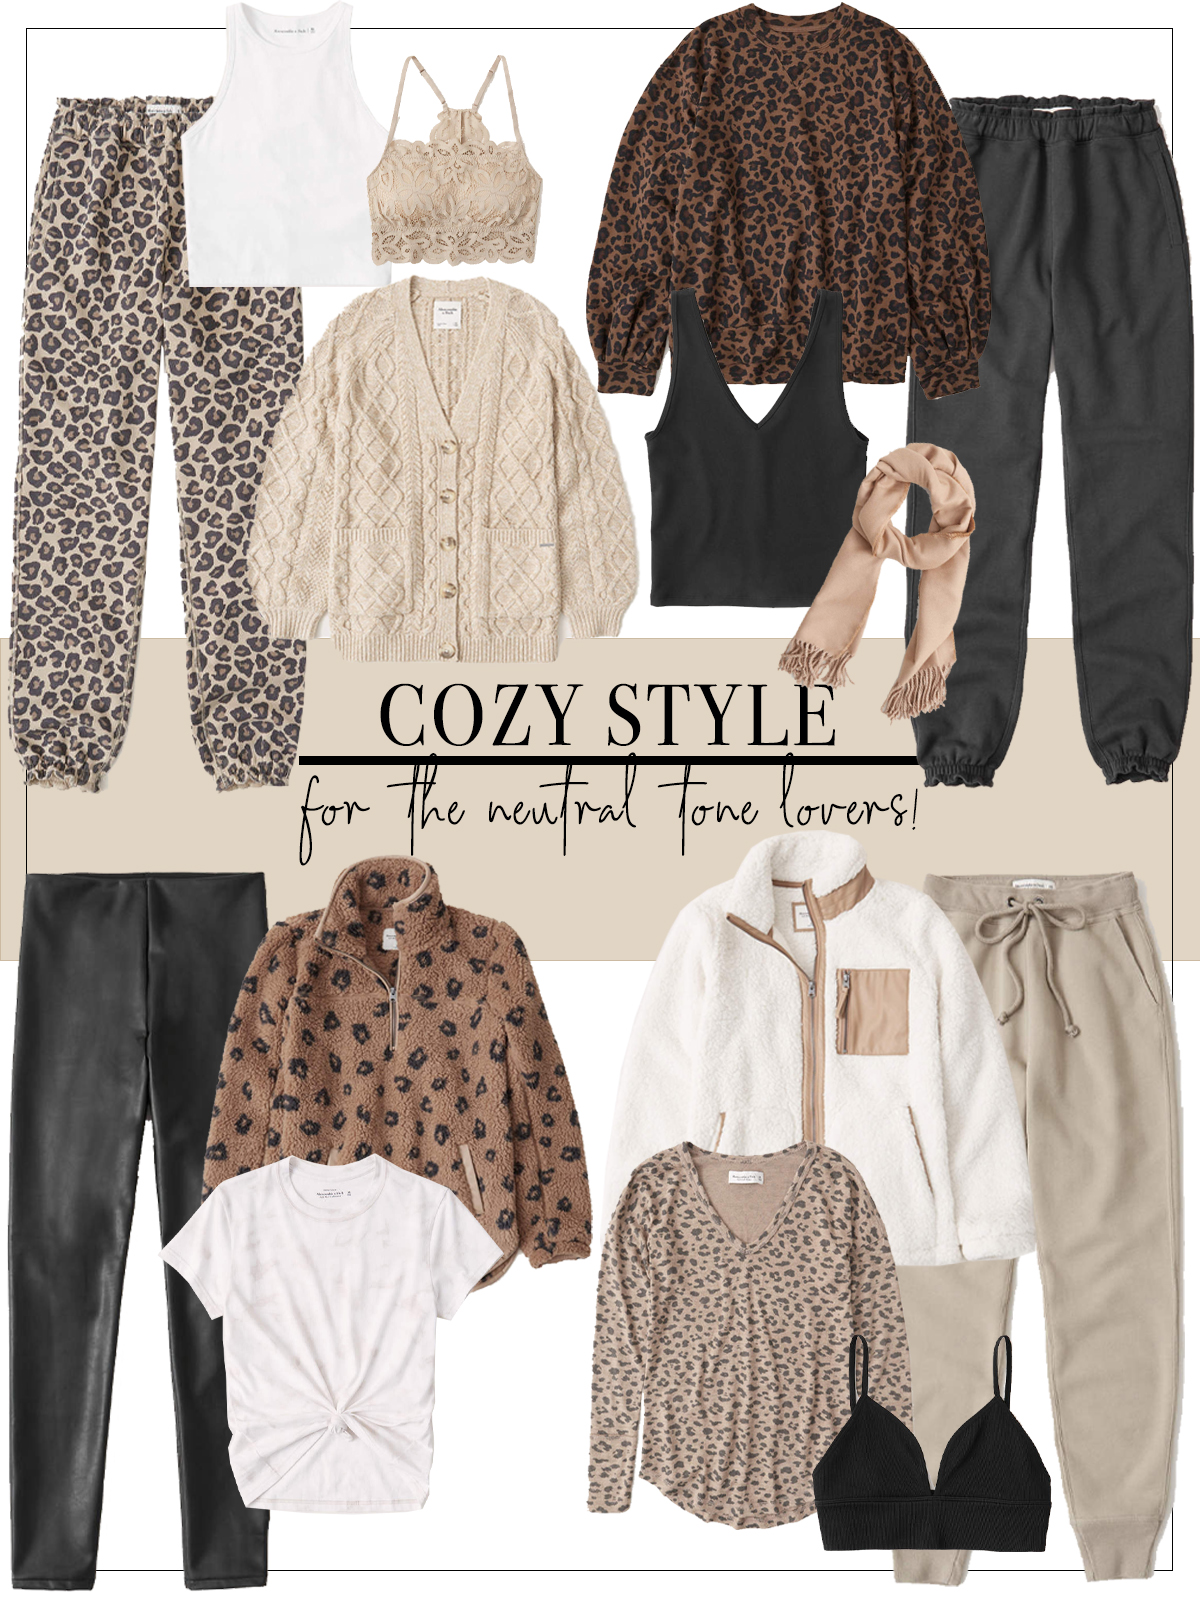 Abercrombie & Fitch cozy fall looks